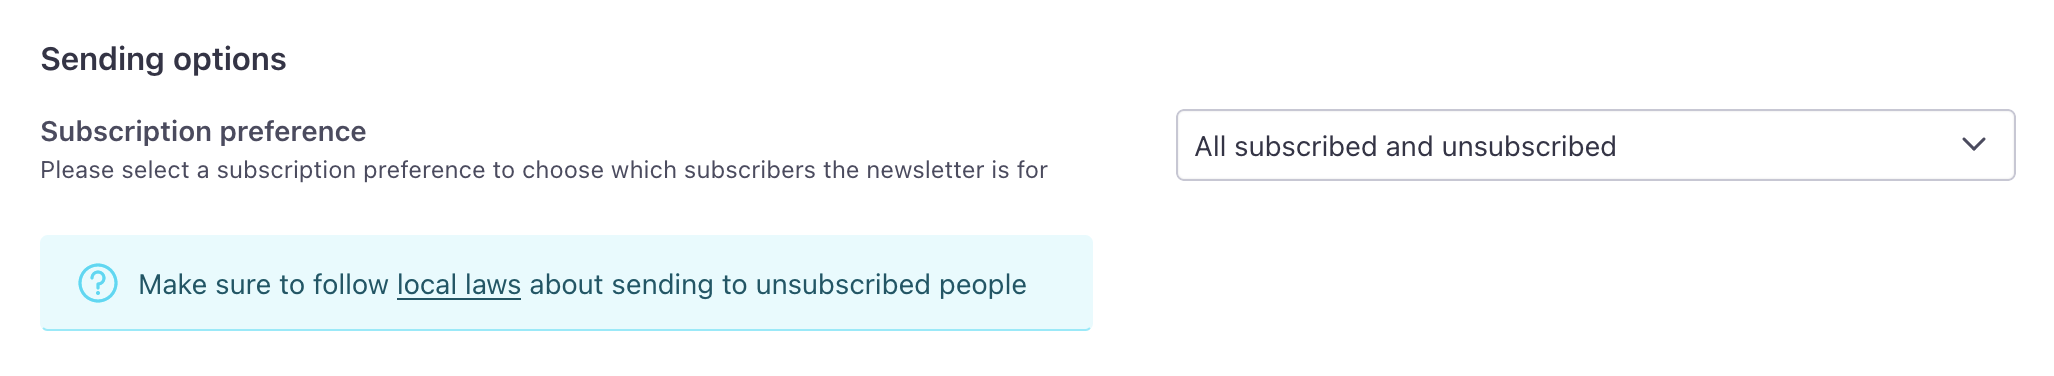 Under Sending options, there is a field titled Subscription preference. To the right is a dropdown field with All subscribed and unsubscribed selected.